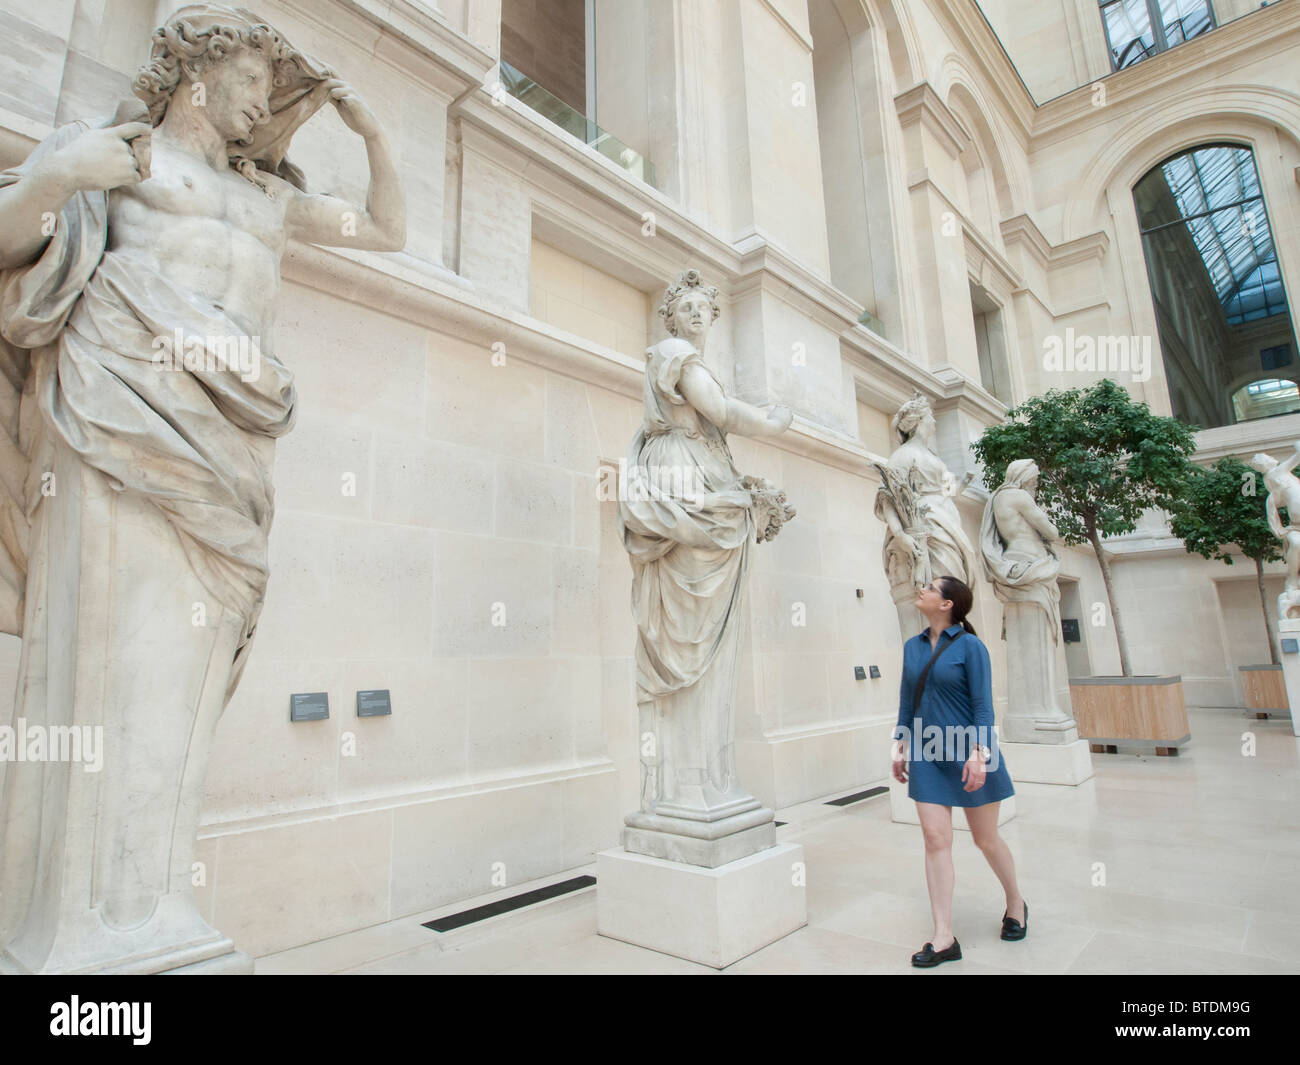 Woman looking at sculptures at the Louvre museum in Paris France Stock Photo